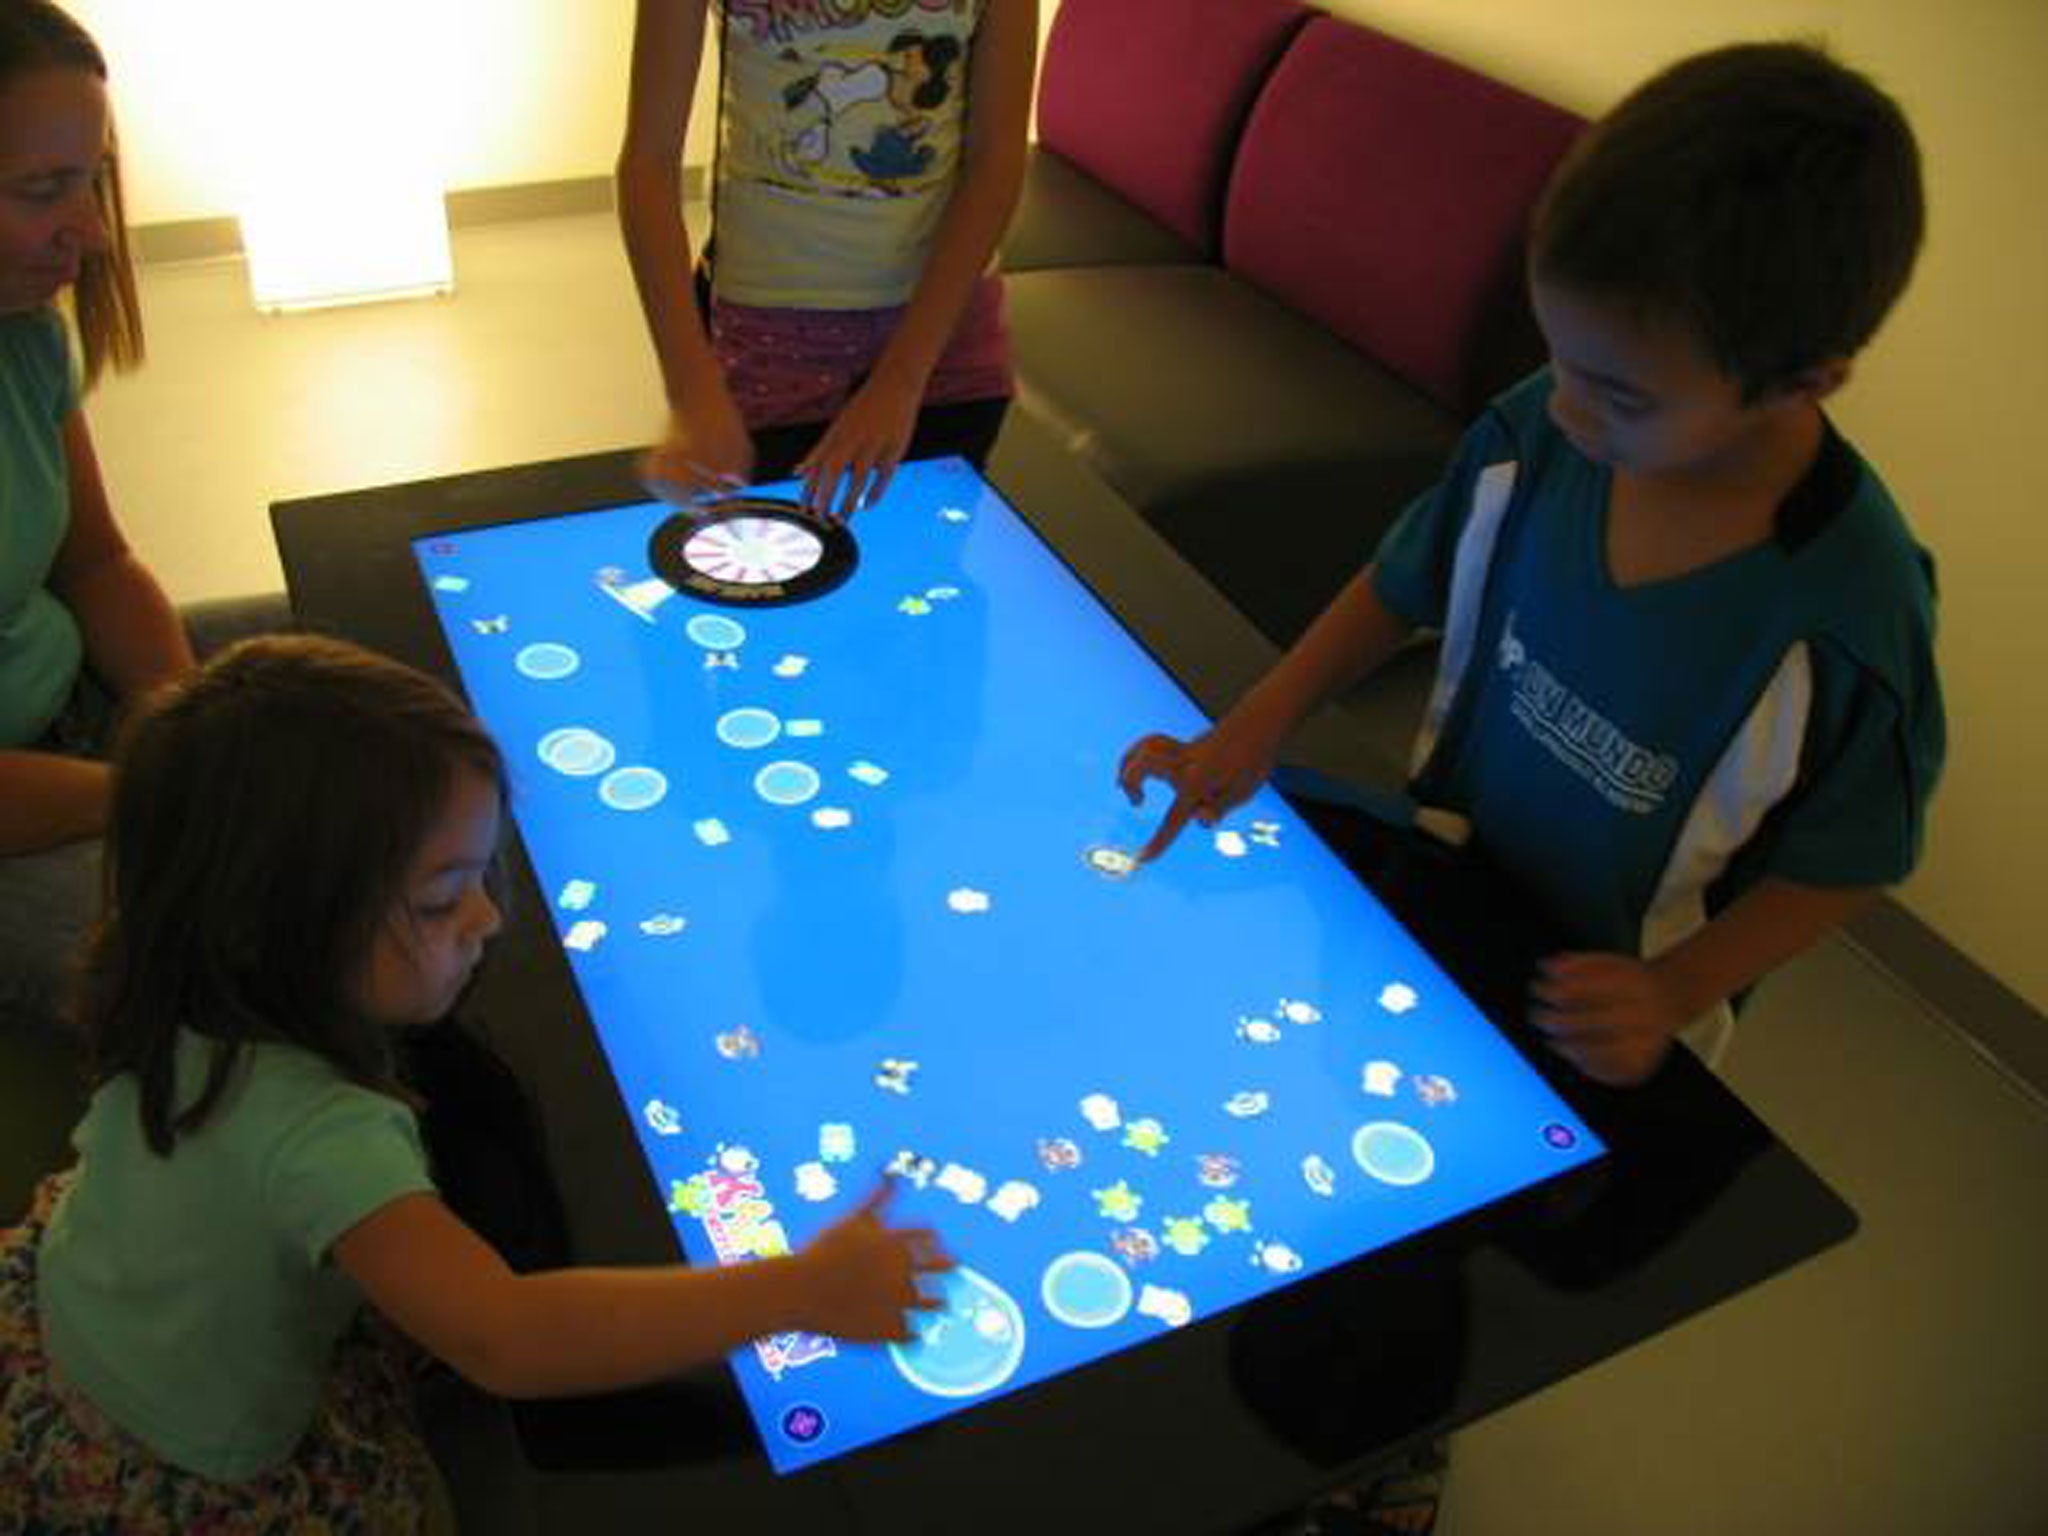 Children play on a tablet at the Bexar County Bibliotech